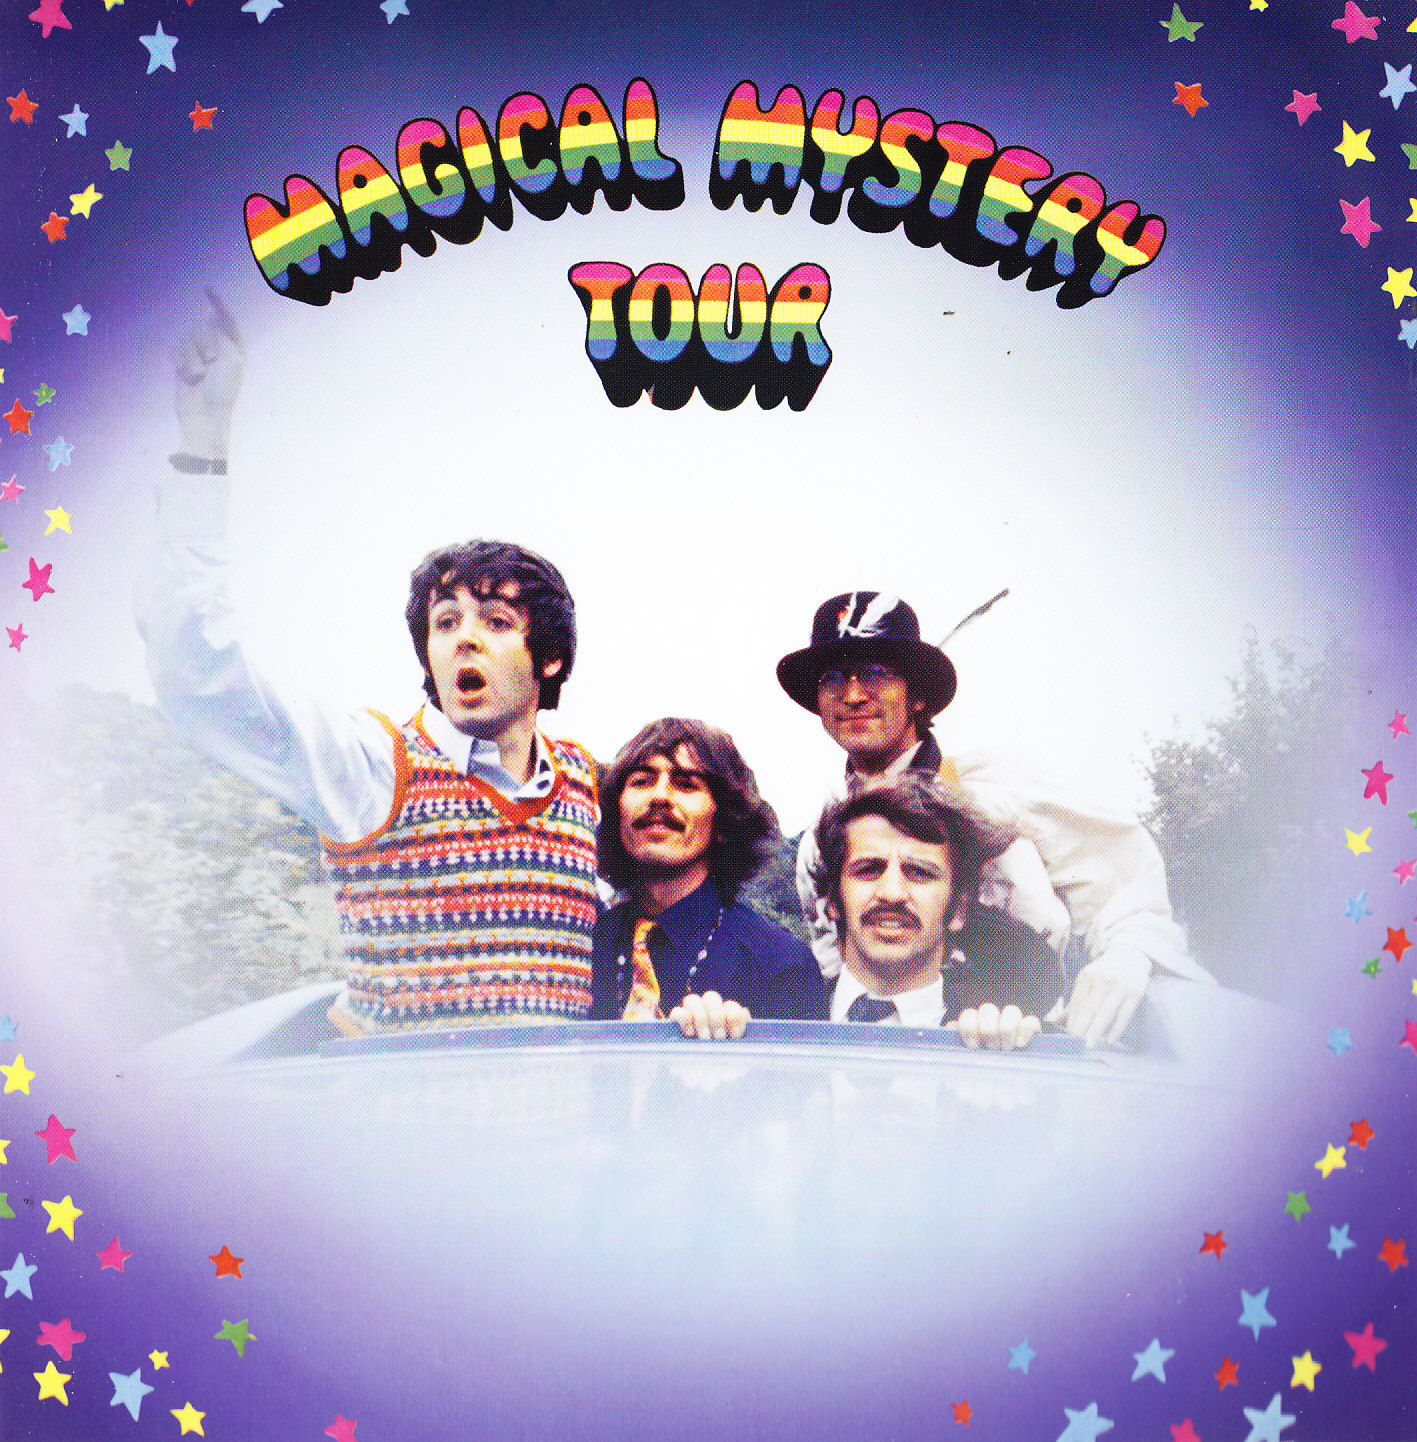 MAGICAL MYSTERY TOUR